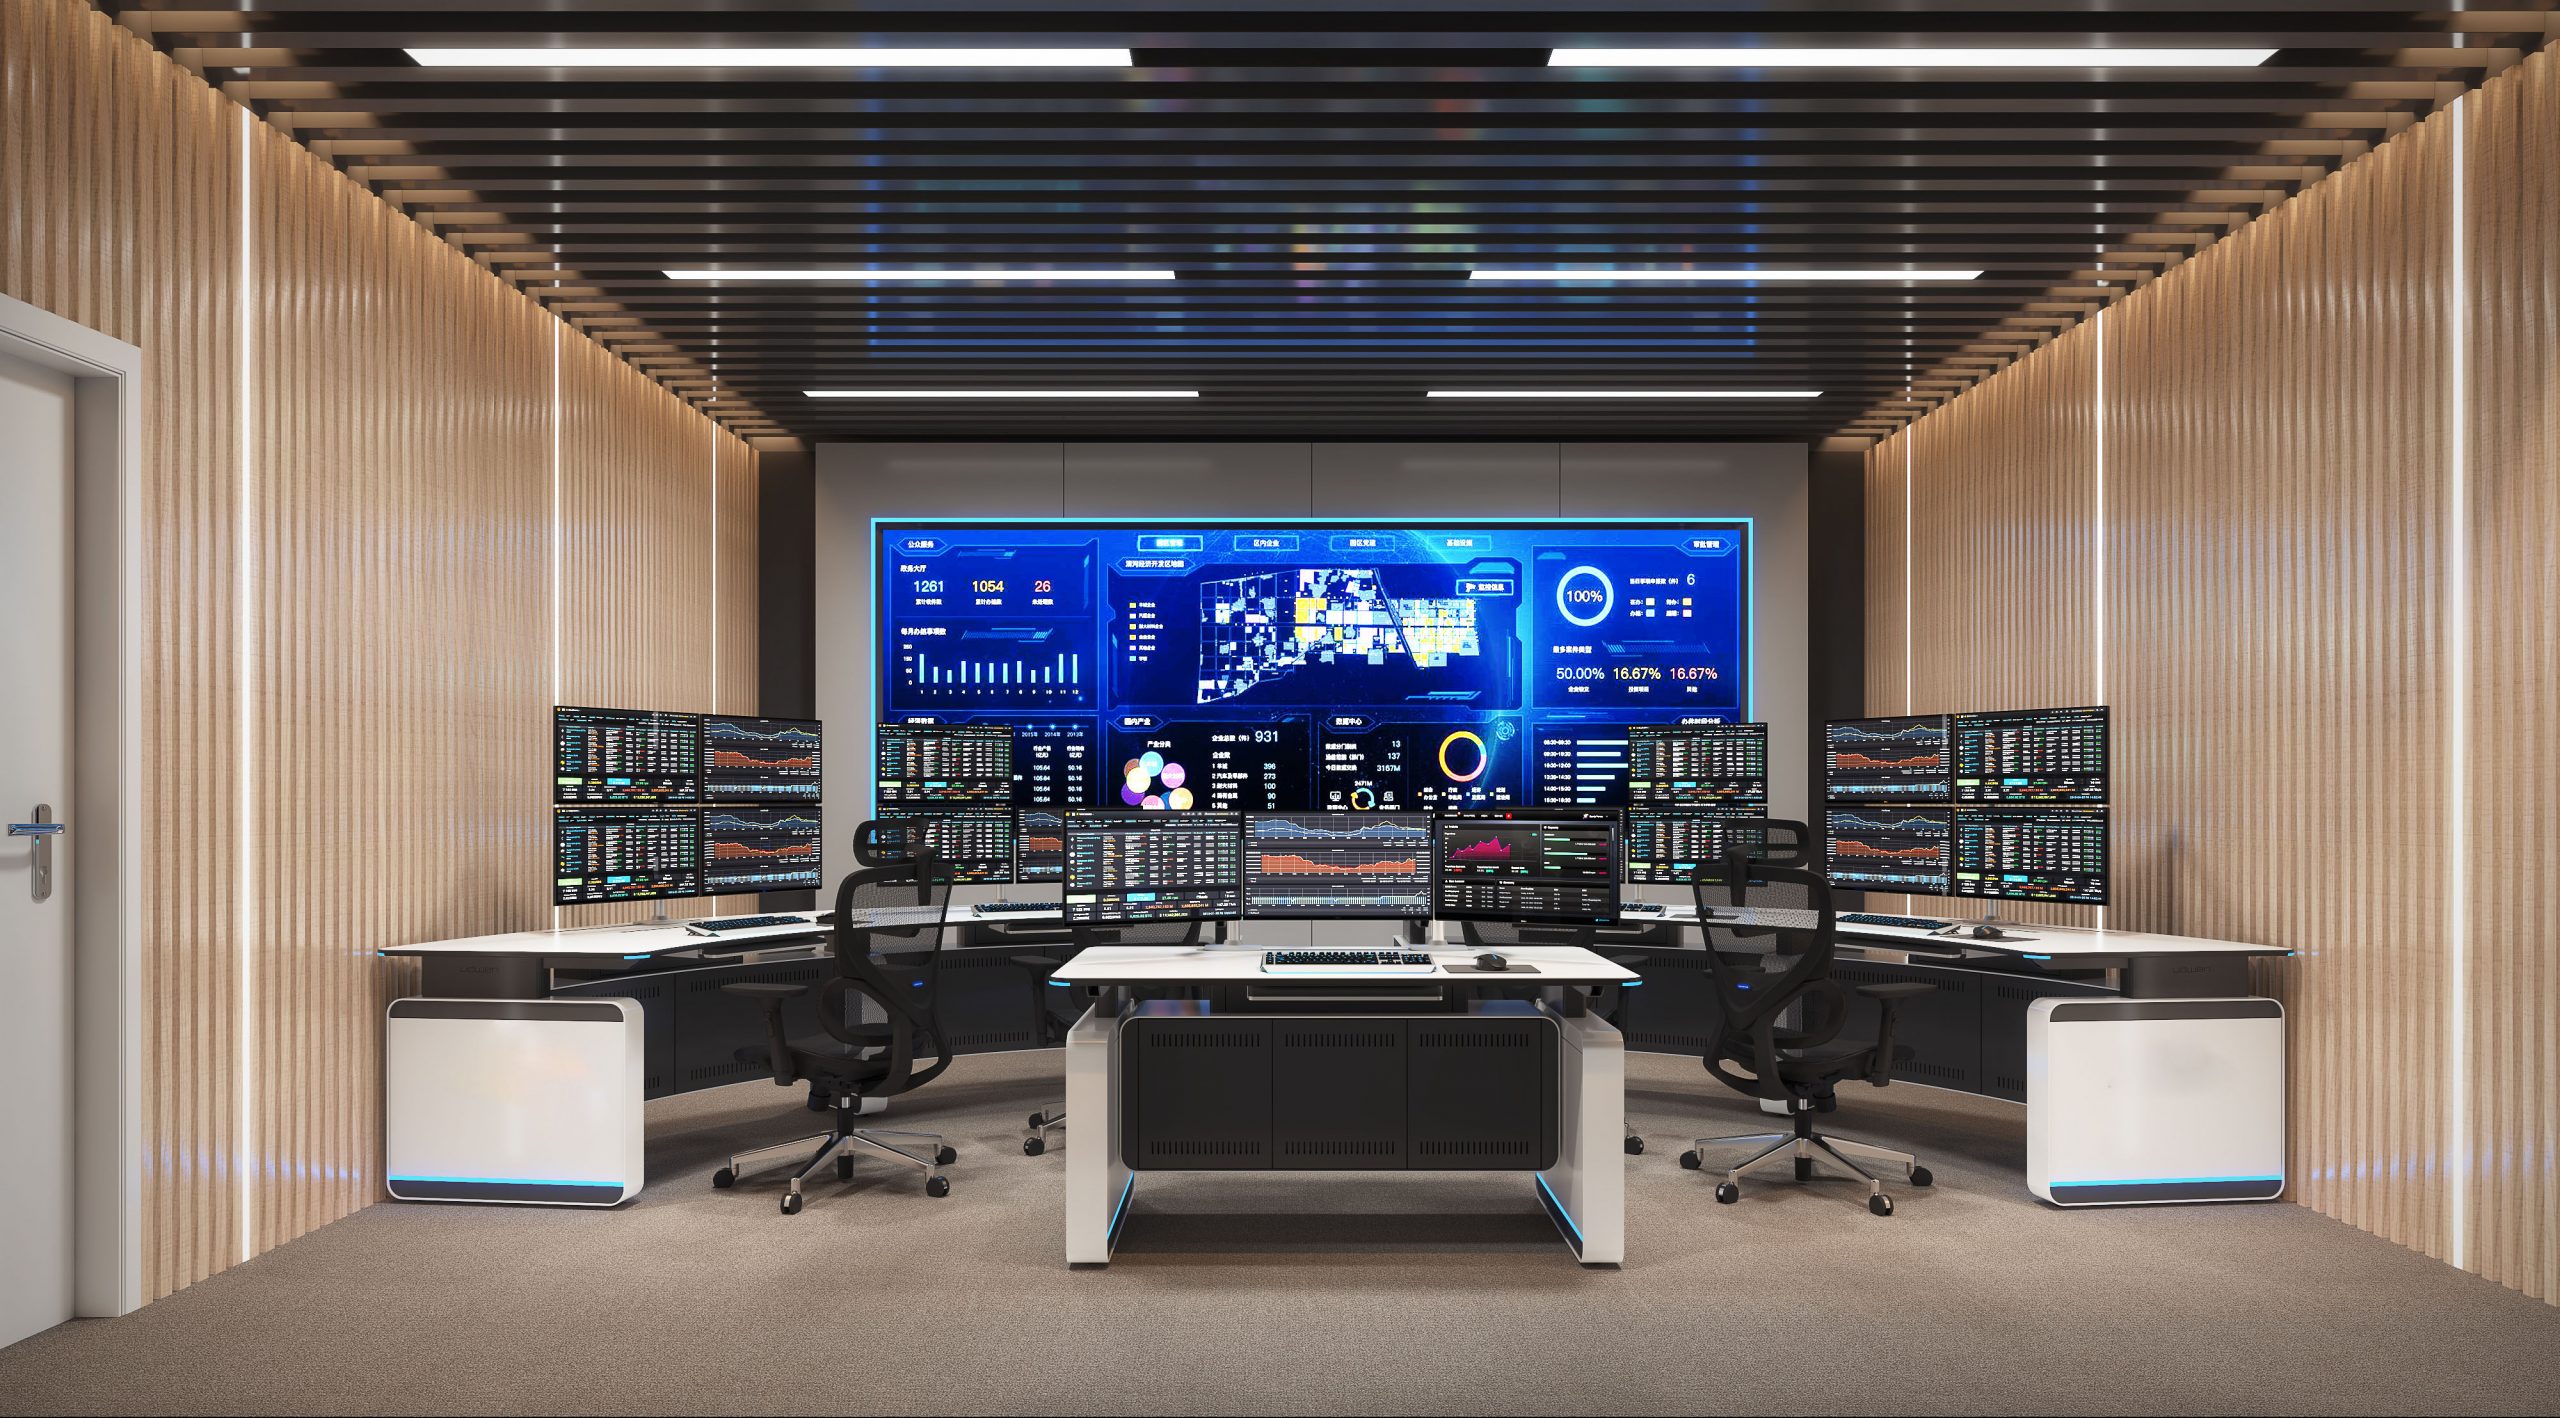 Why use a multi-user workstation console when considering the room layout for a security command center?